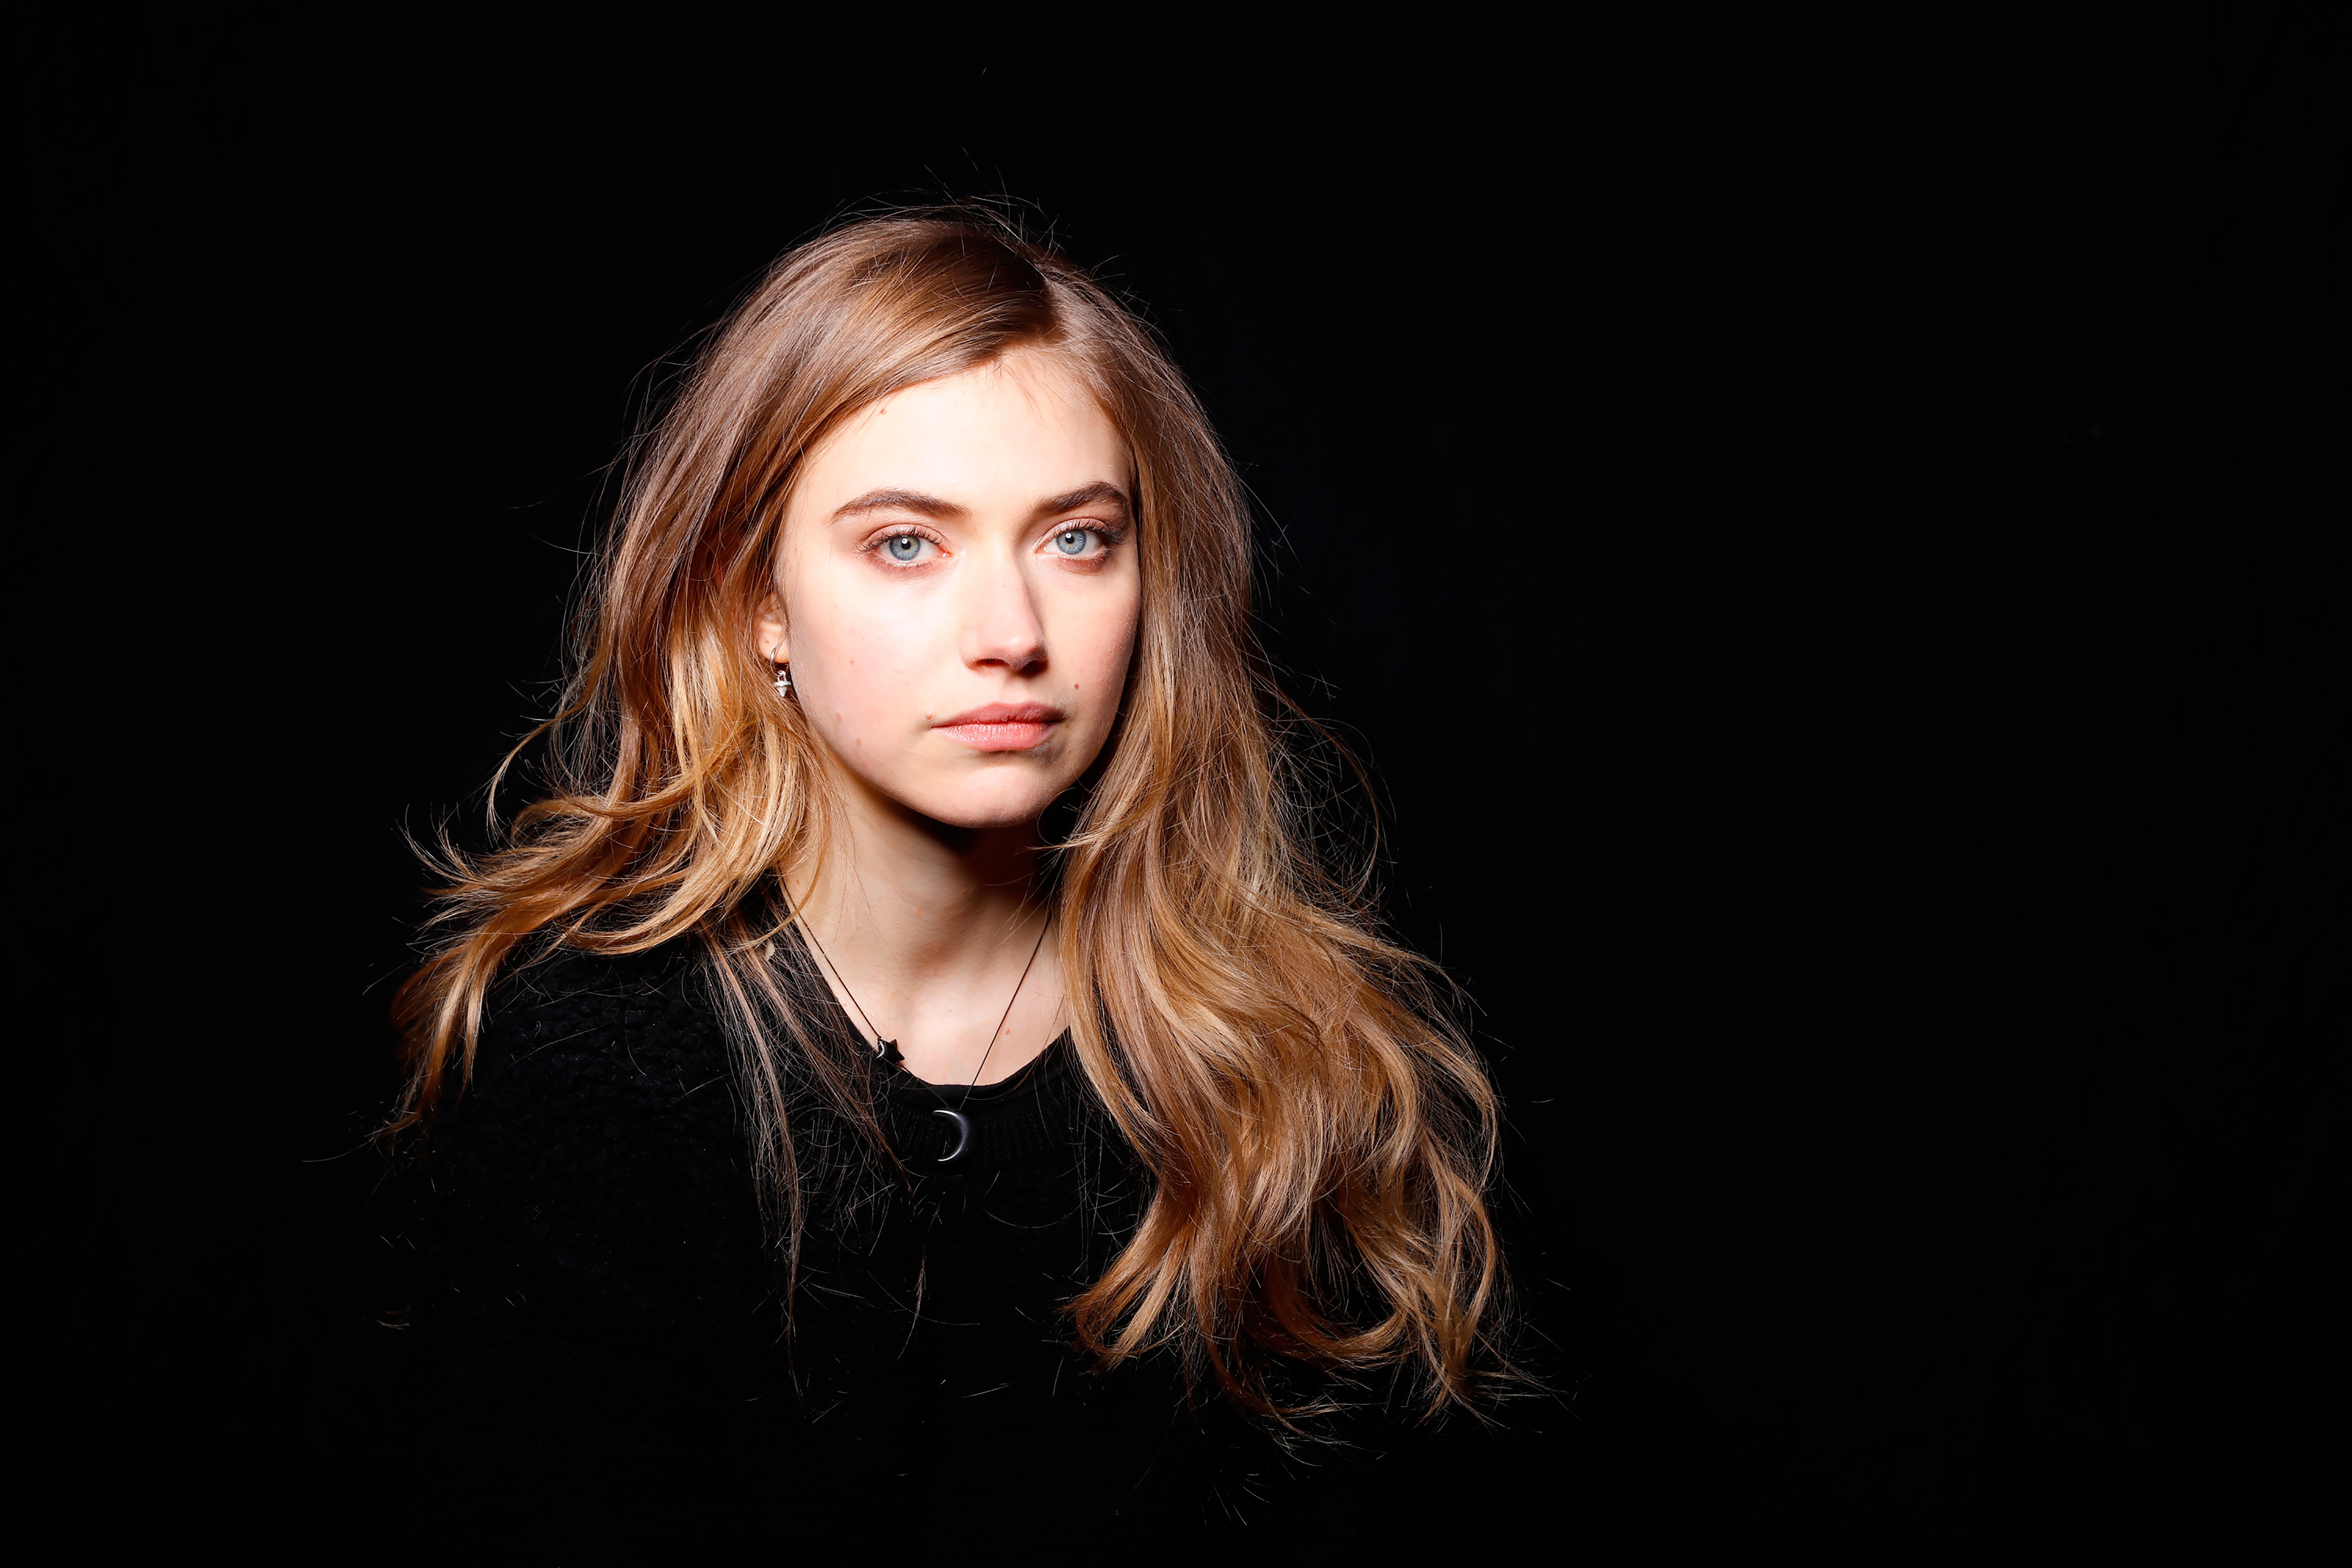 Imogen Poots Cute Photoshoot 2017 Wallpapers